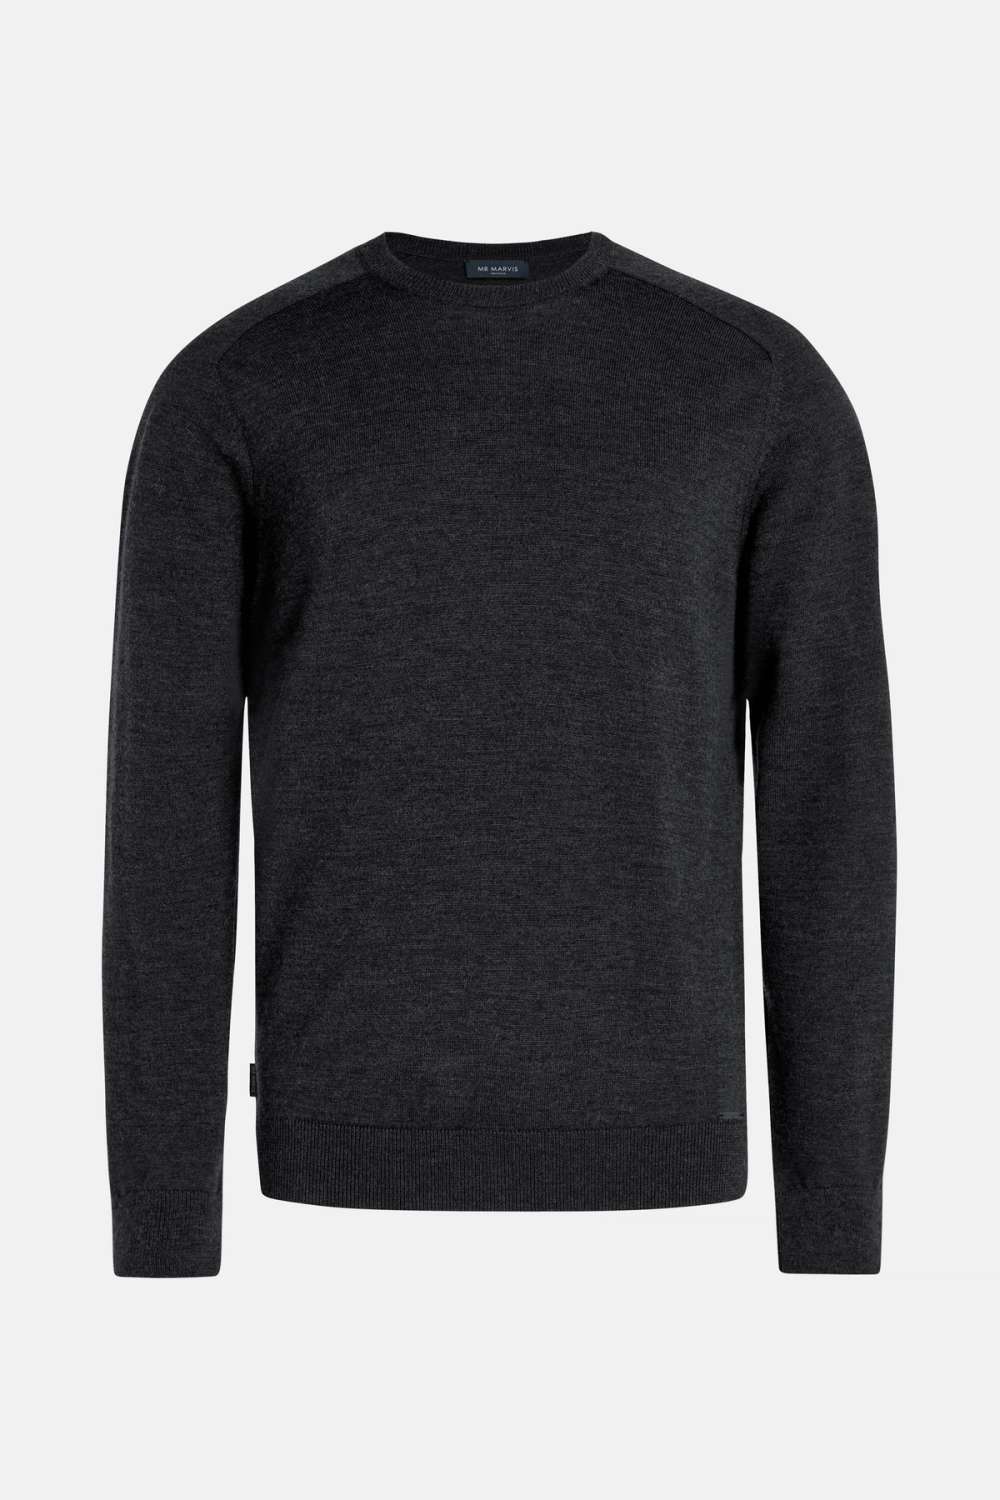 Storms - The Merino Pullover